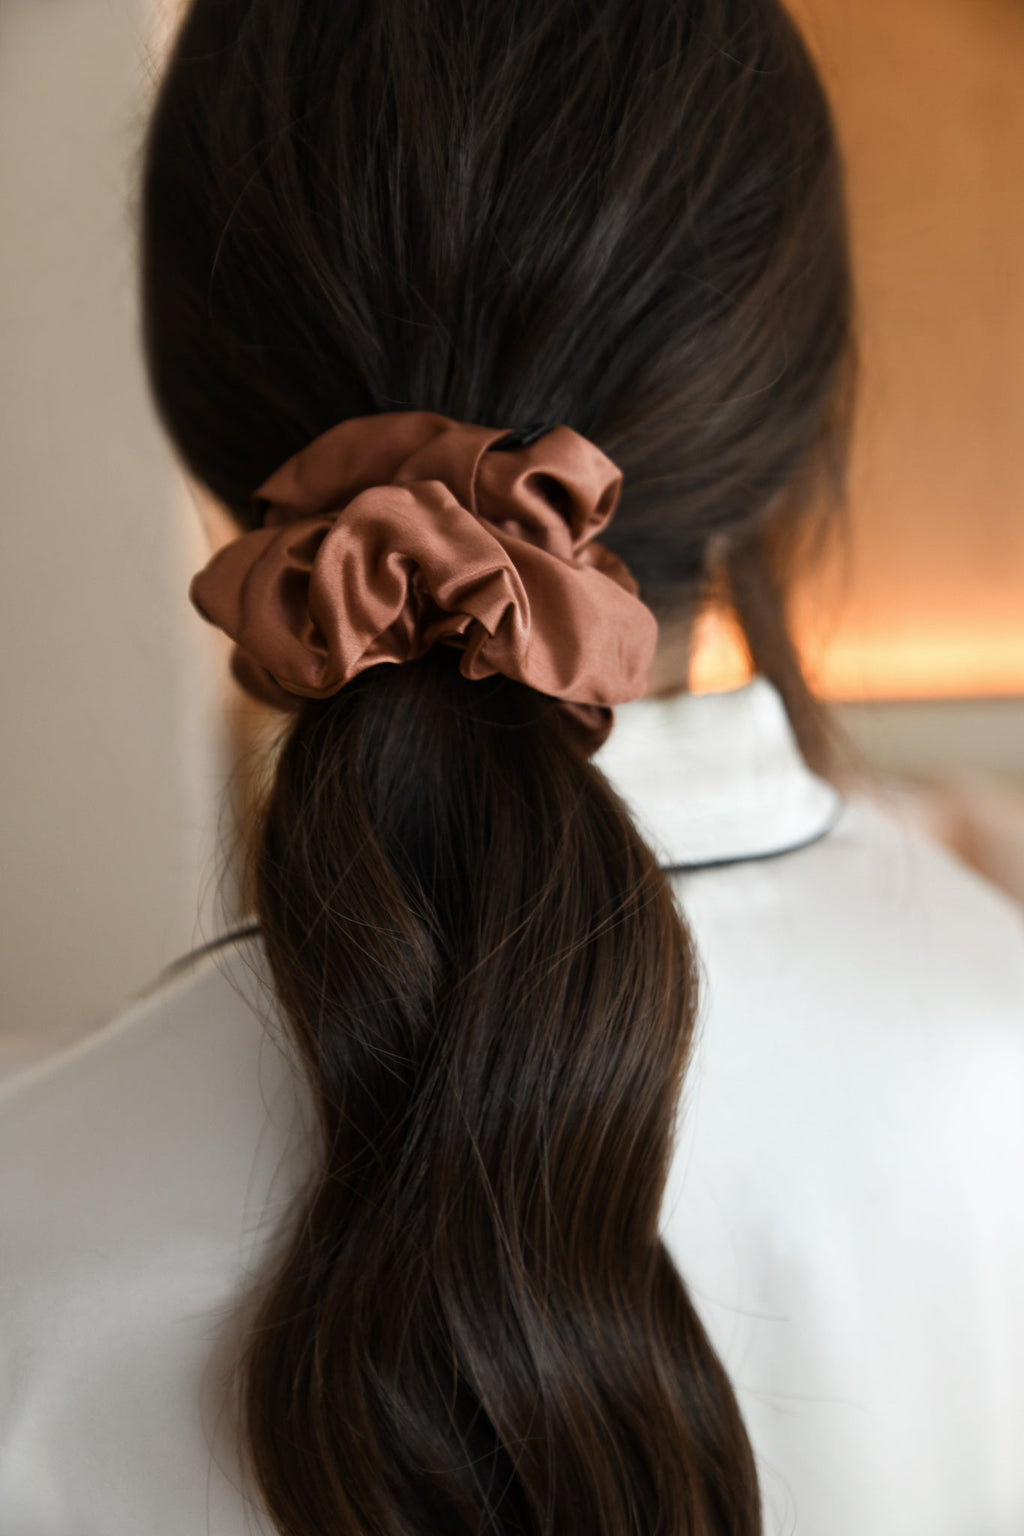 Large mulberry silk hair scrunchie in woman's hair. The r and r collective.